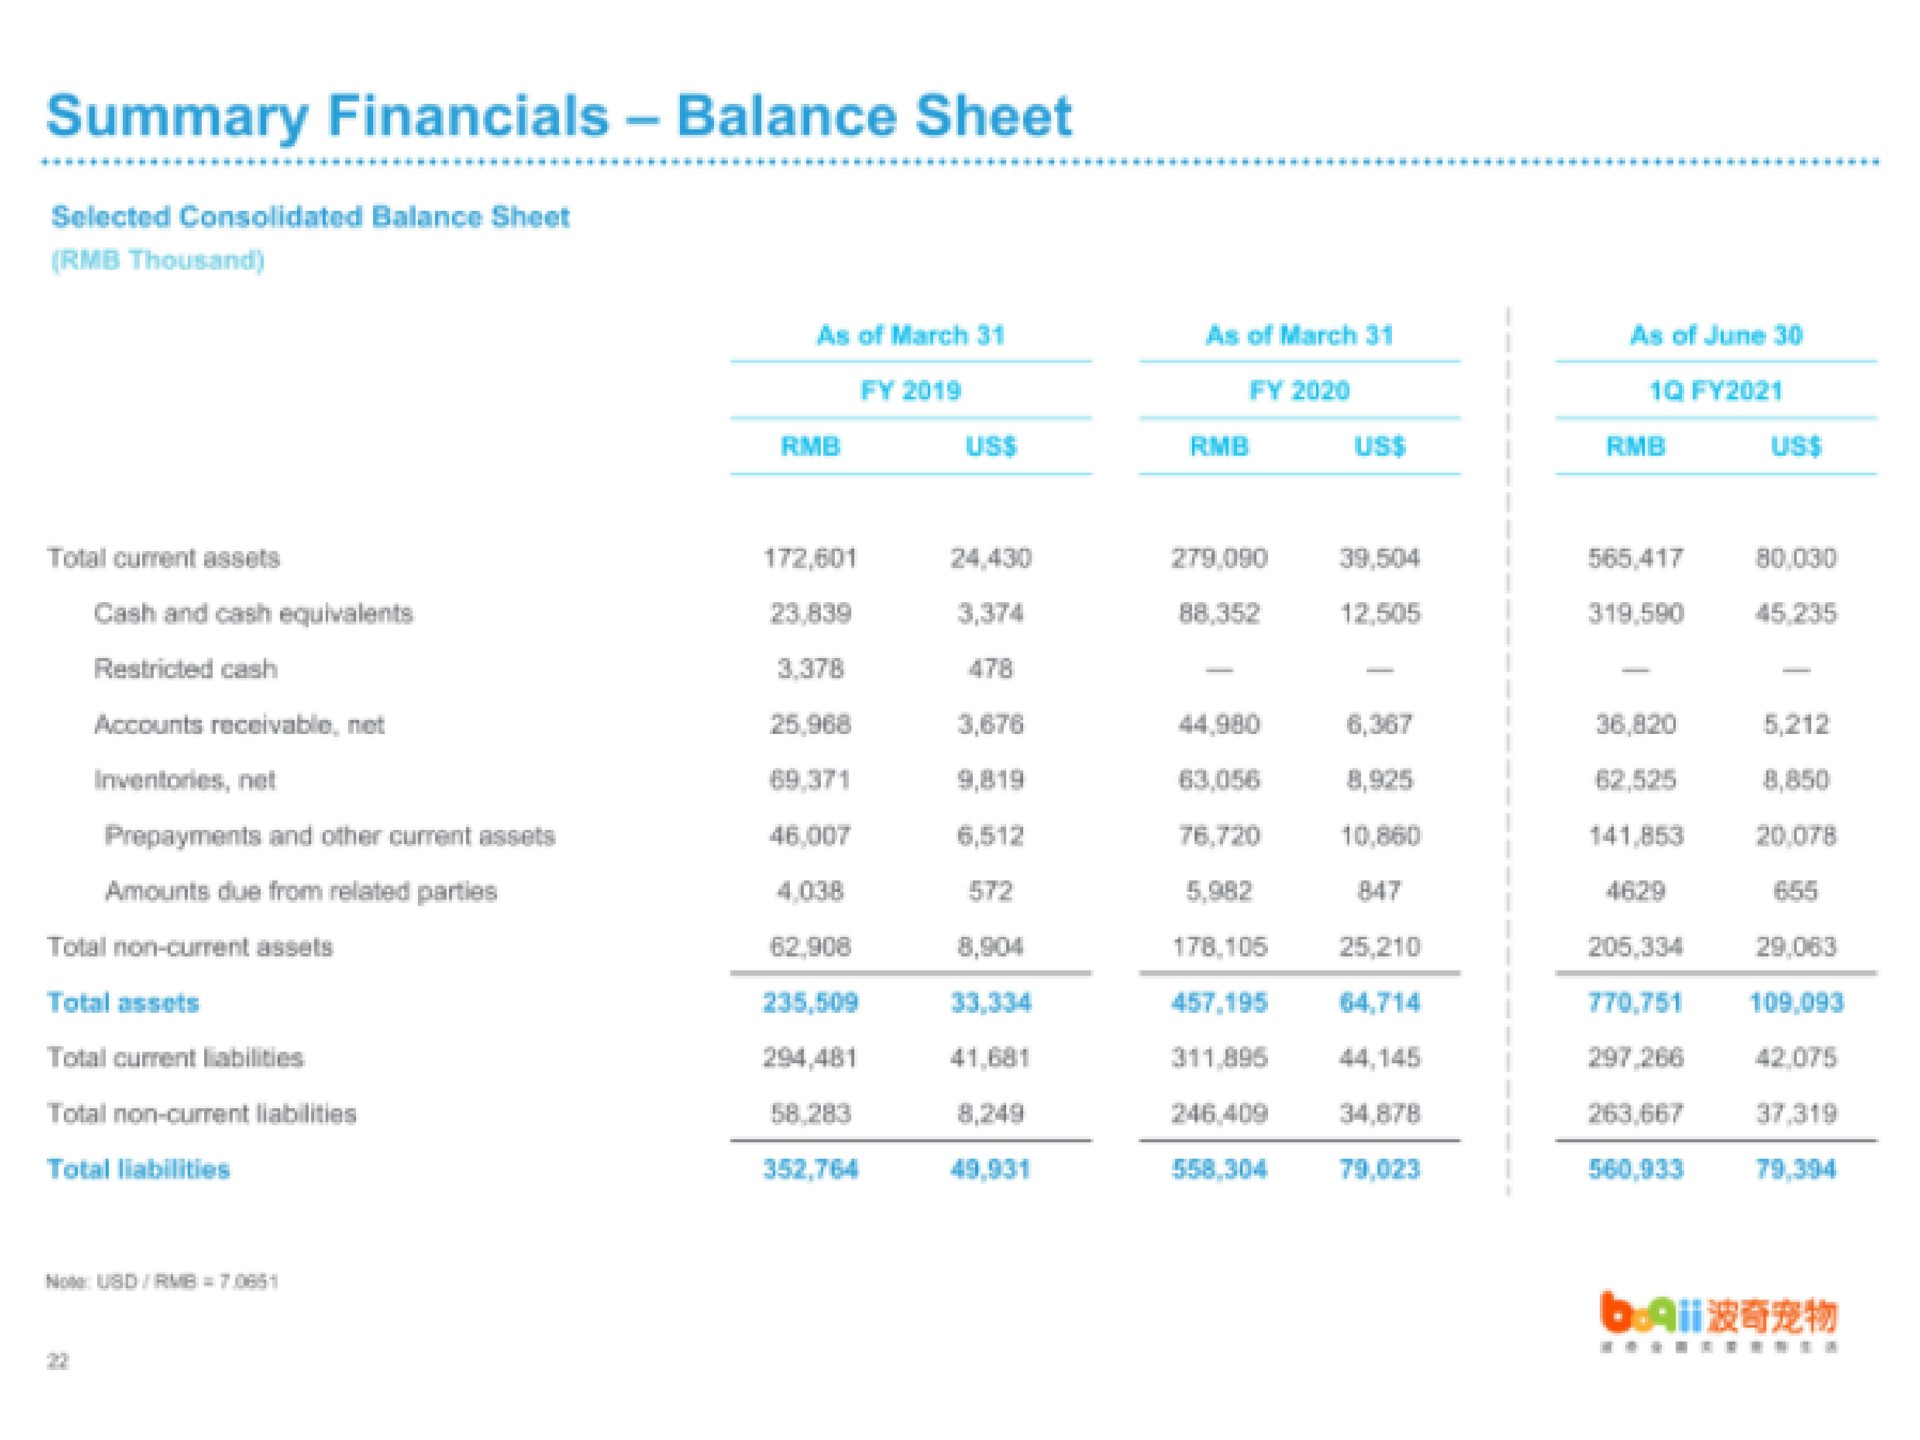 summary balance sheet selected consolidated balance sheet thousand as of march as of march as of june cash and cash equivalents inventories mat prepayments and other current due from related parties total assets total current total non current liabilities bet bay a | Boqii Holding